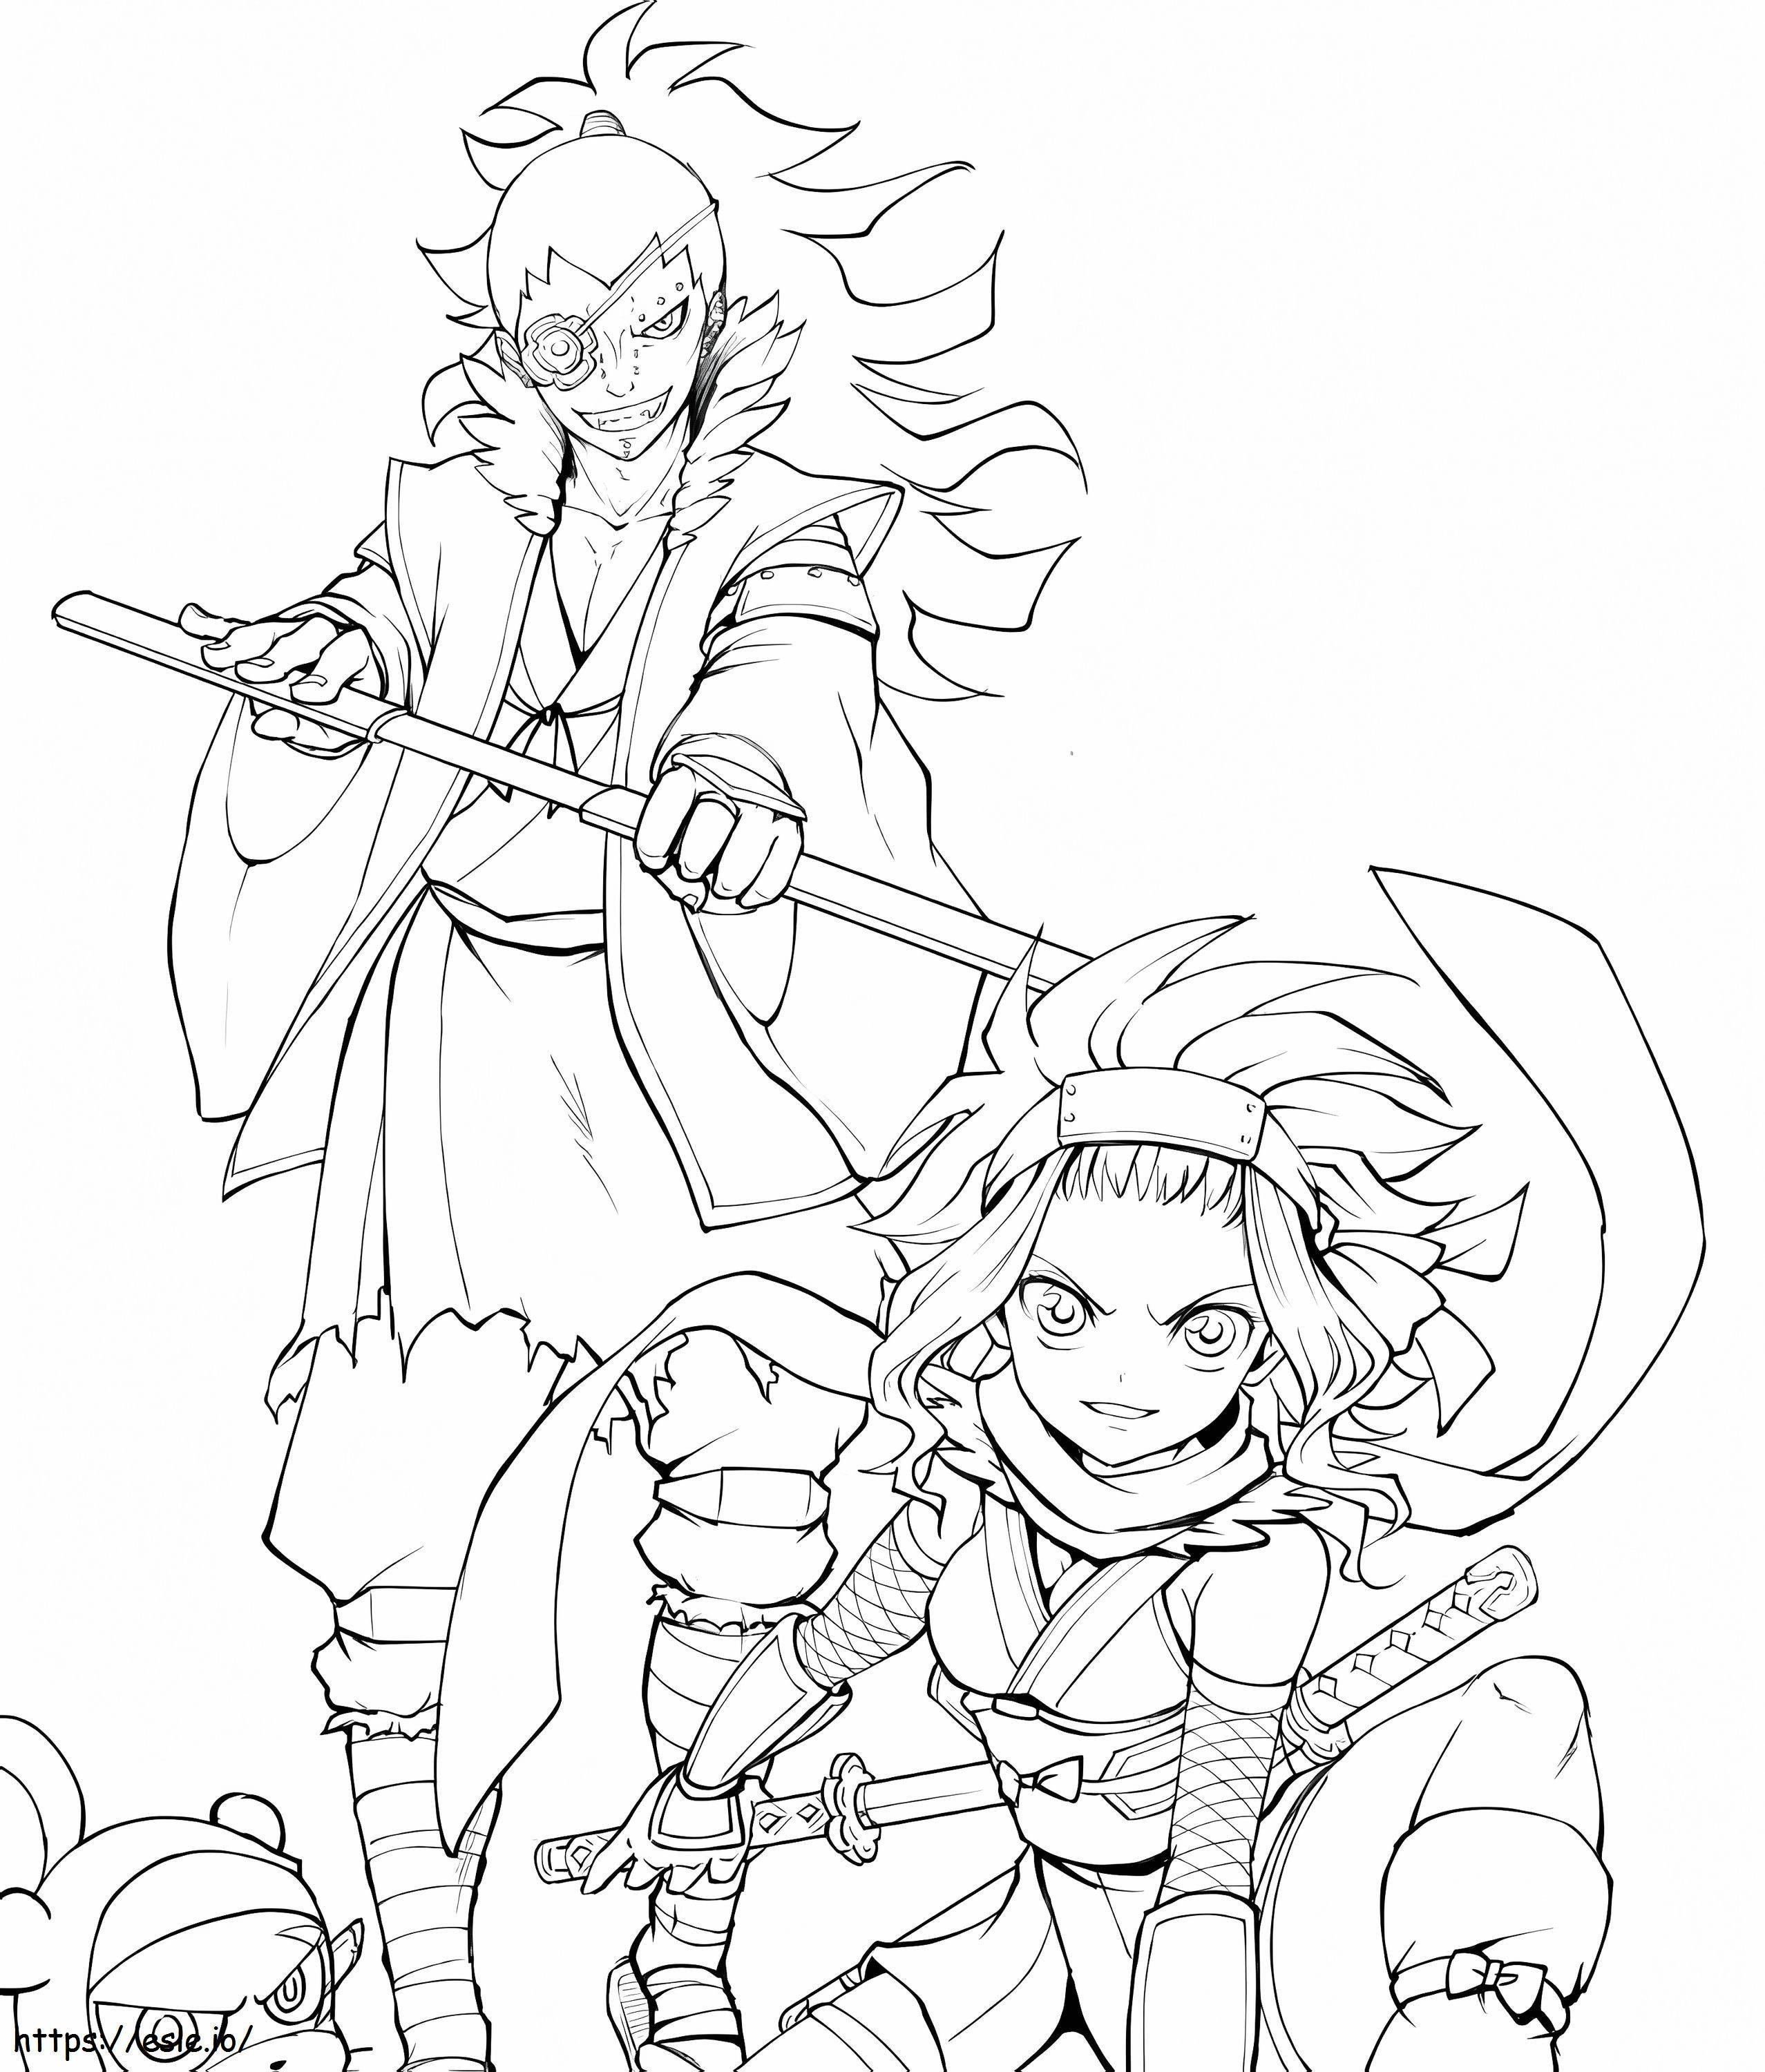 Gajeel And Levy coloring page